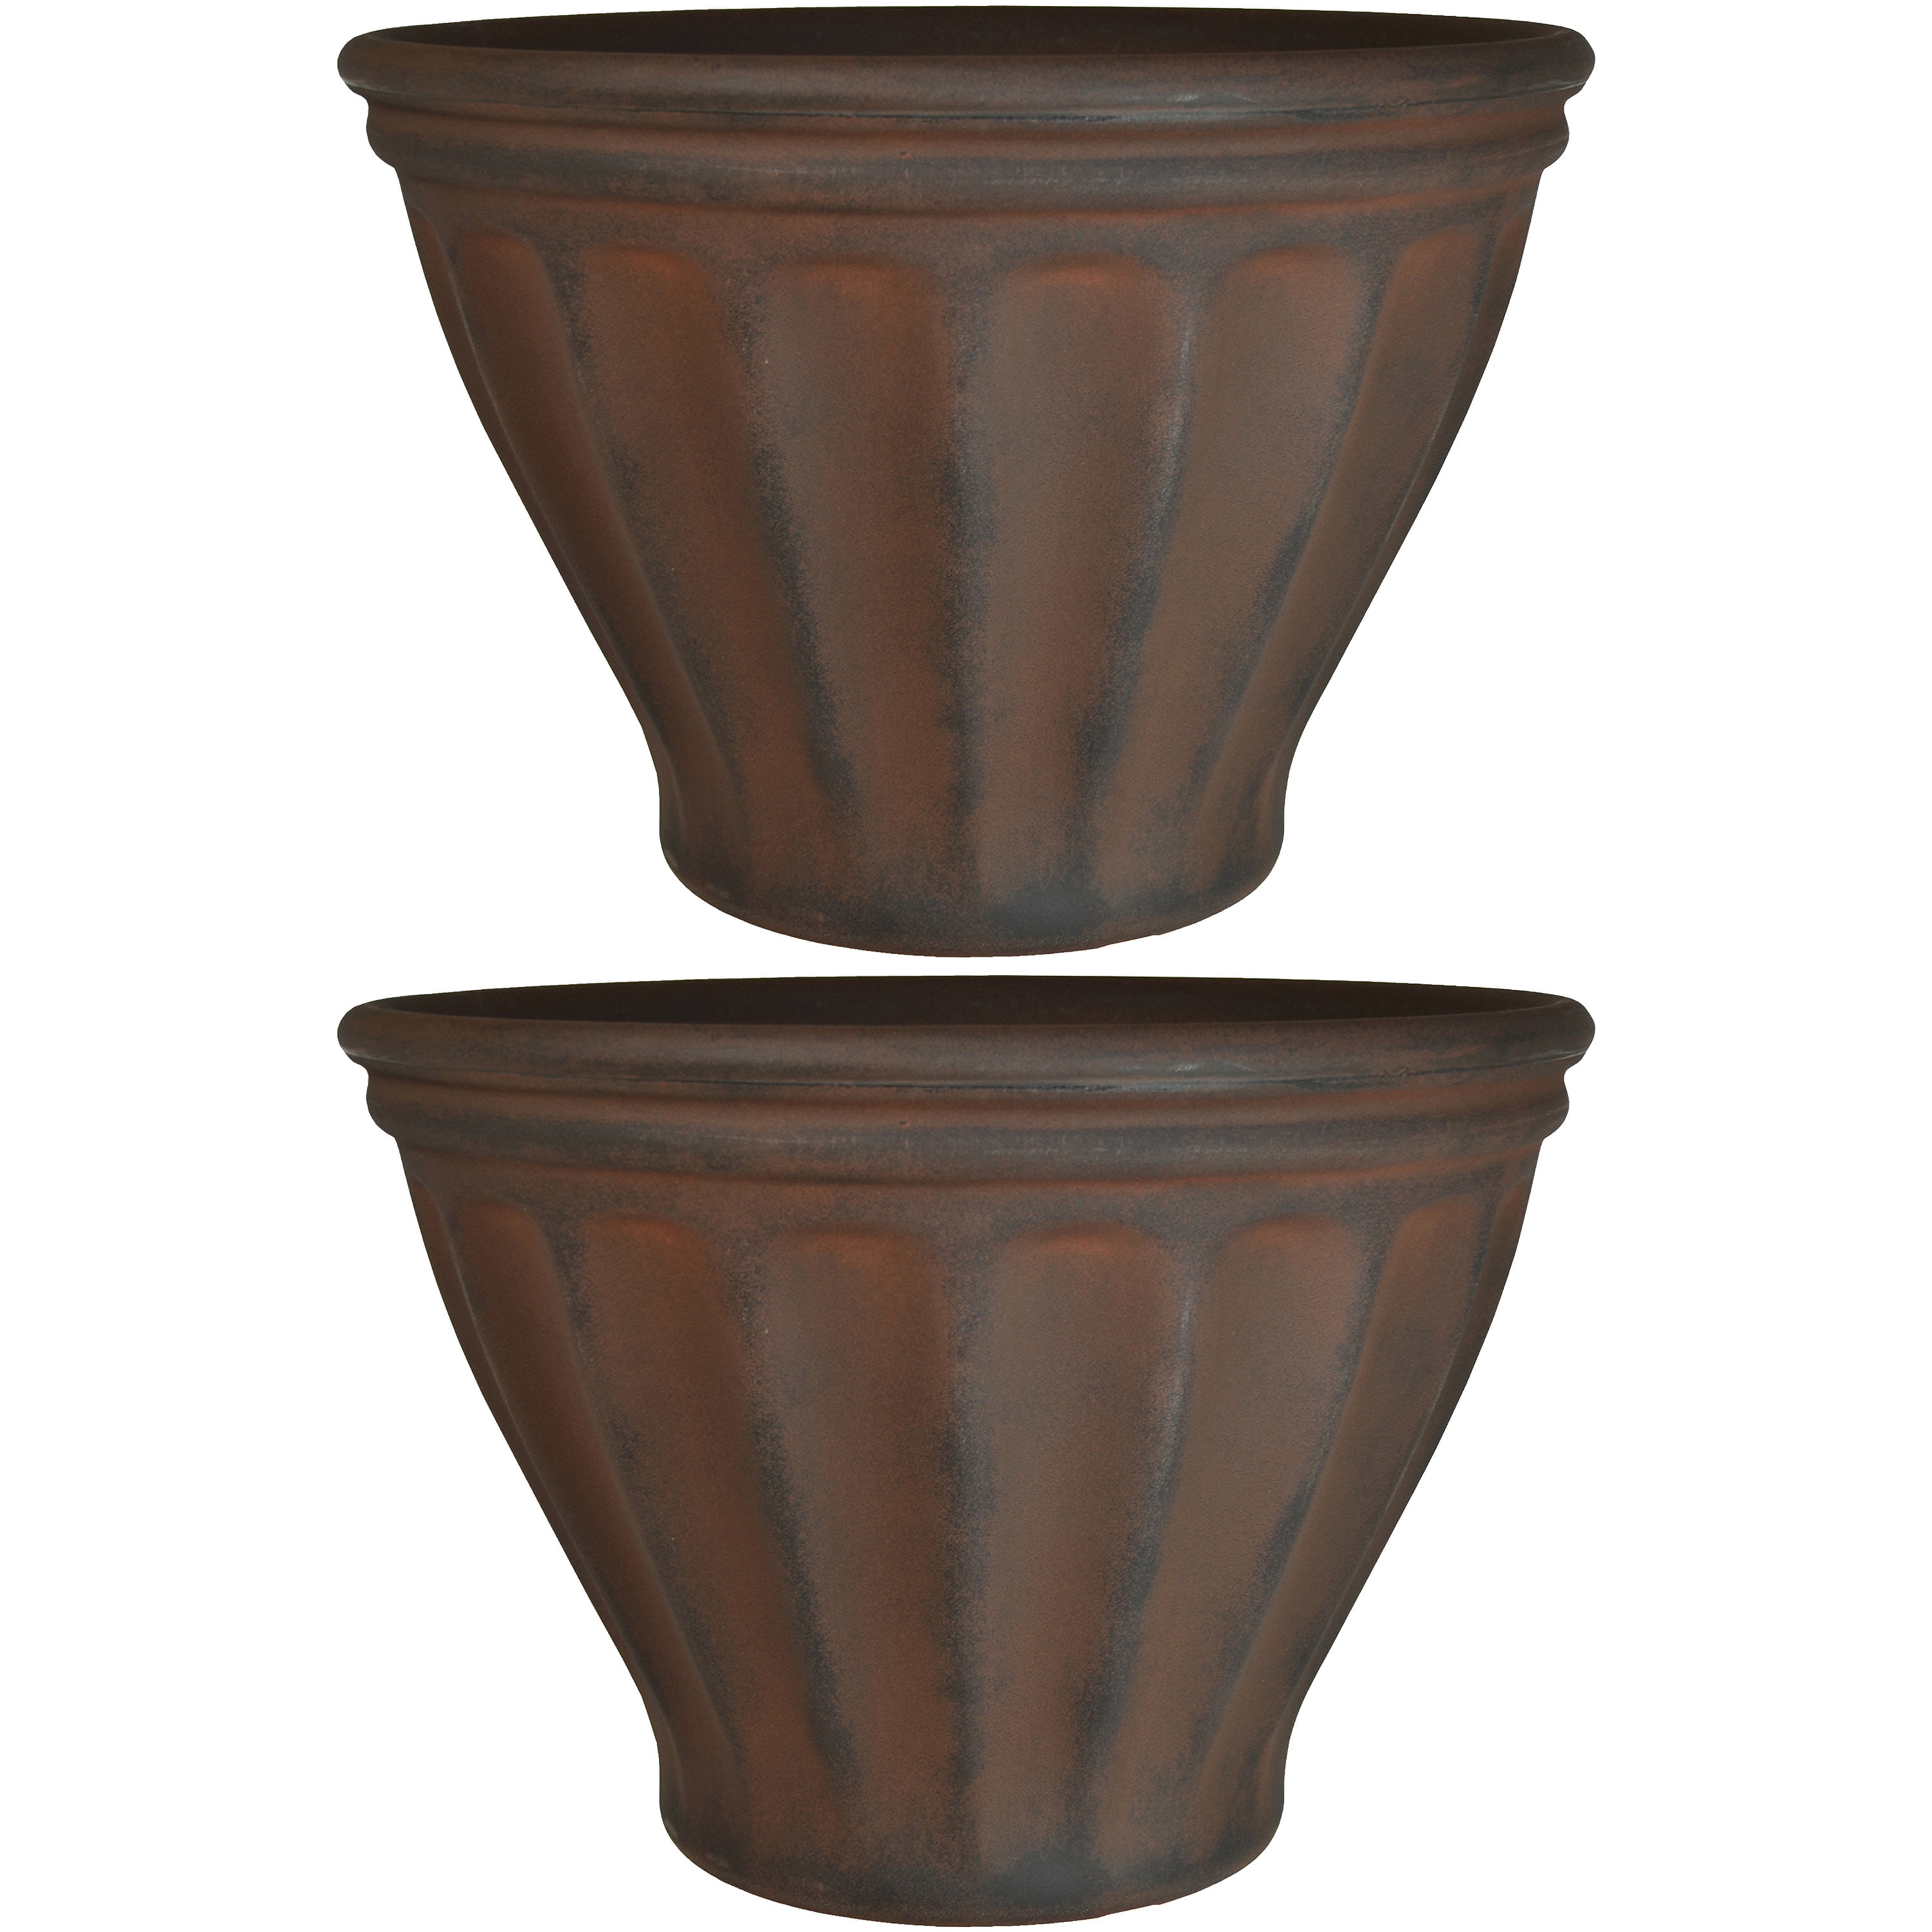 Sunnydaze Walter Flower Pot Planter 16-Inch Diameter Set of 4 Outdoor/Indoor Heavy-Duty Double-Walled Polyresin Fade-Resistant Antique White Finish 